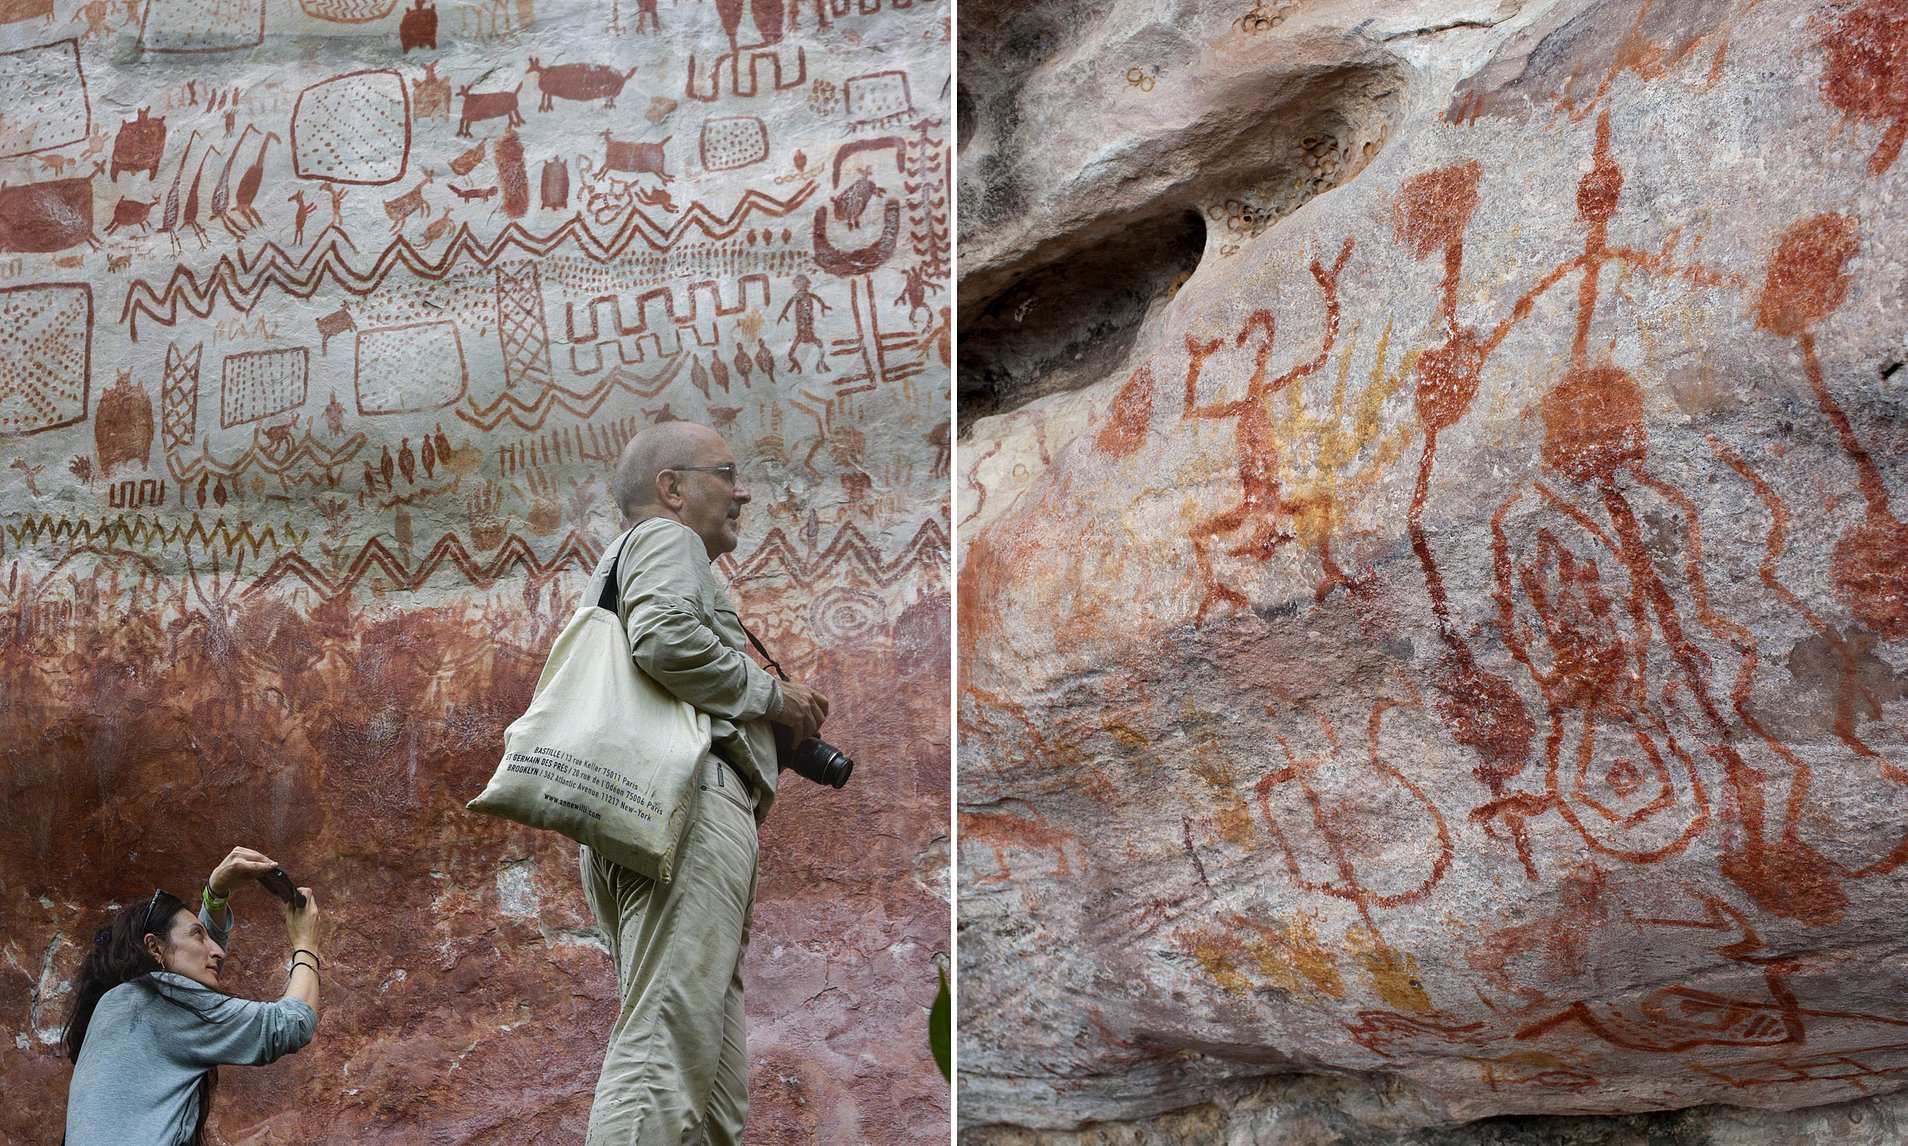 It's 12 kilometers long.12,000 years old murals found in the Amazon rainforest